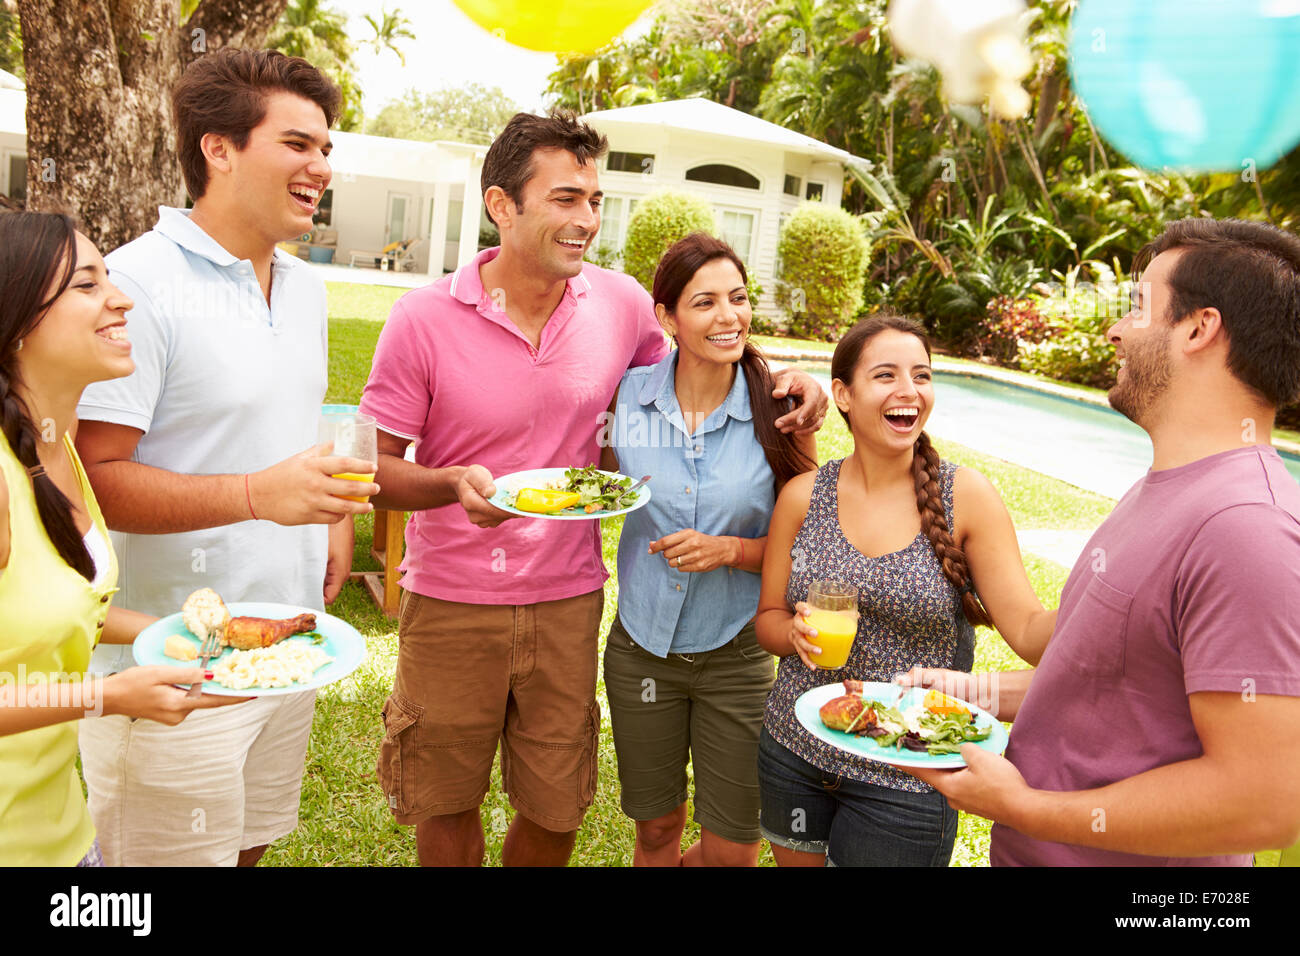 Group Of Friends Having Party In Backyard At Home Stock Photo